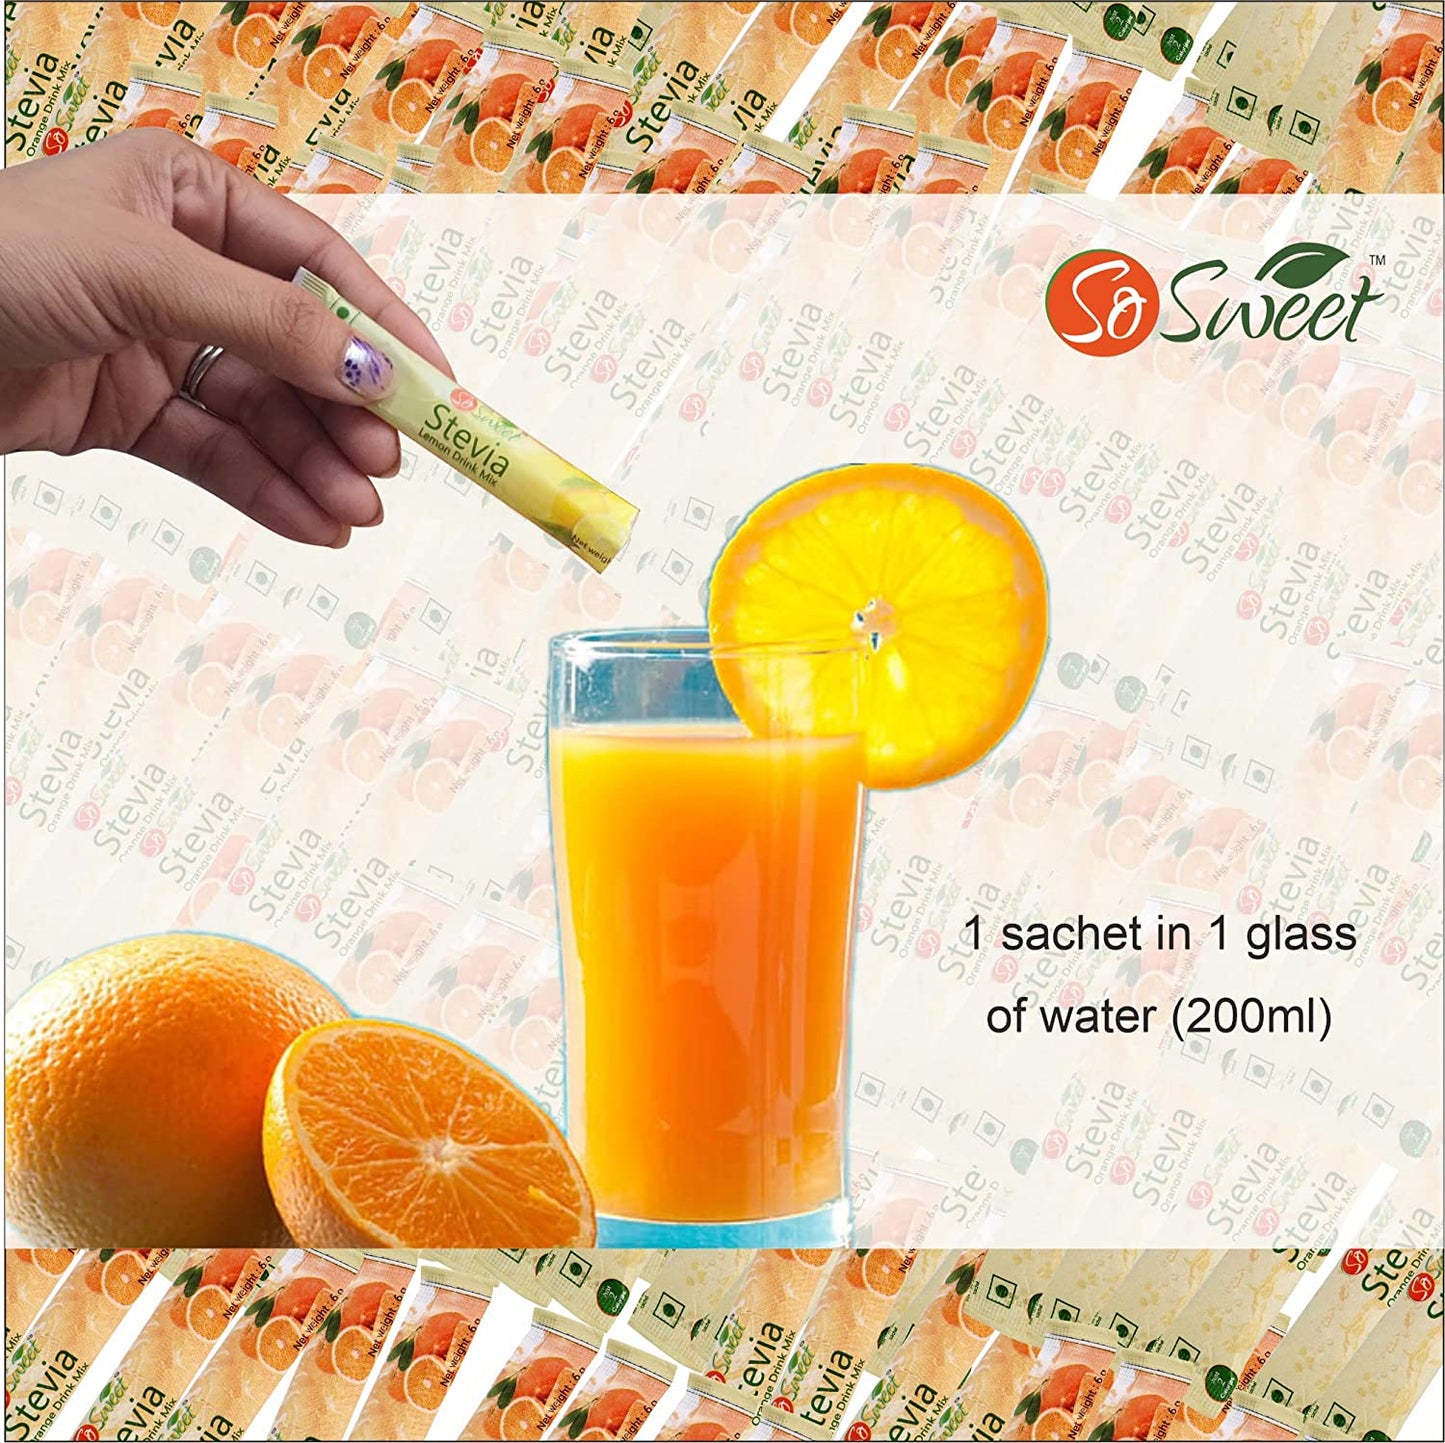 So Sweet Stevia Orange Instant Drink Mix Sugar Free | Zero Calories| Enrich with Vitamin C | 12 Sachets -Pack of 4